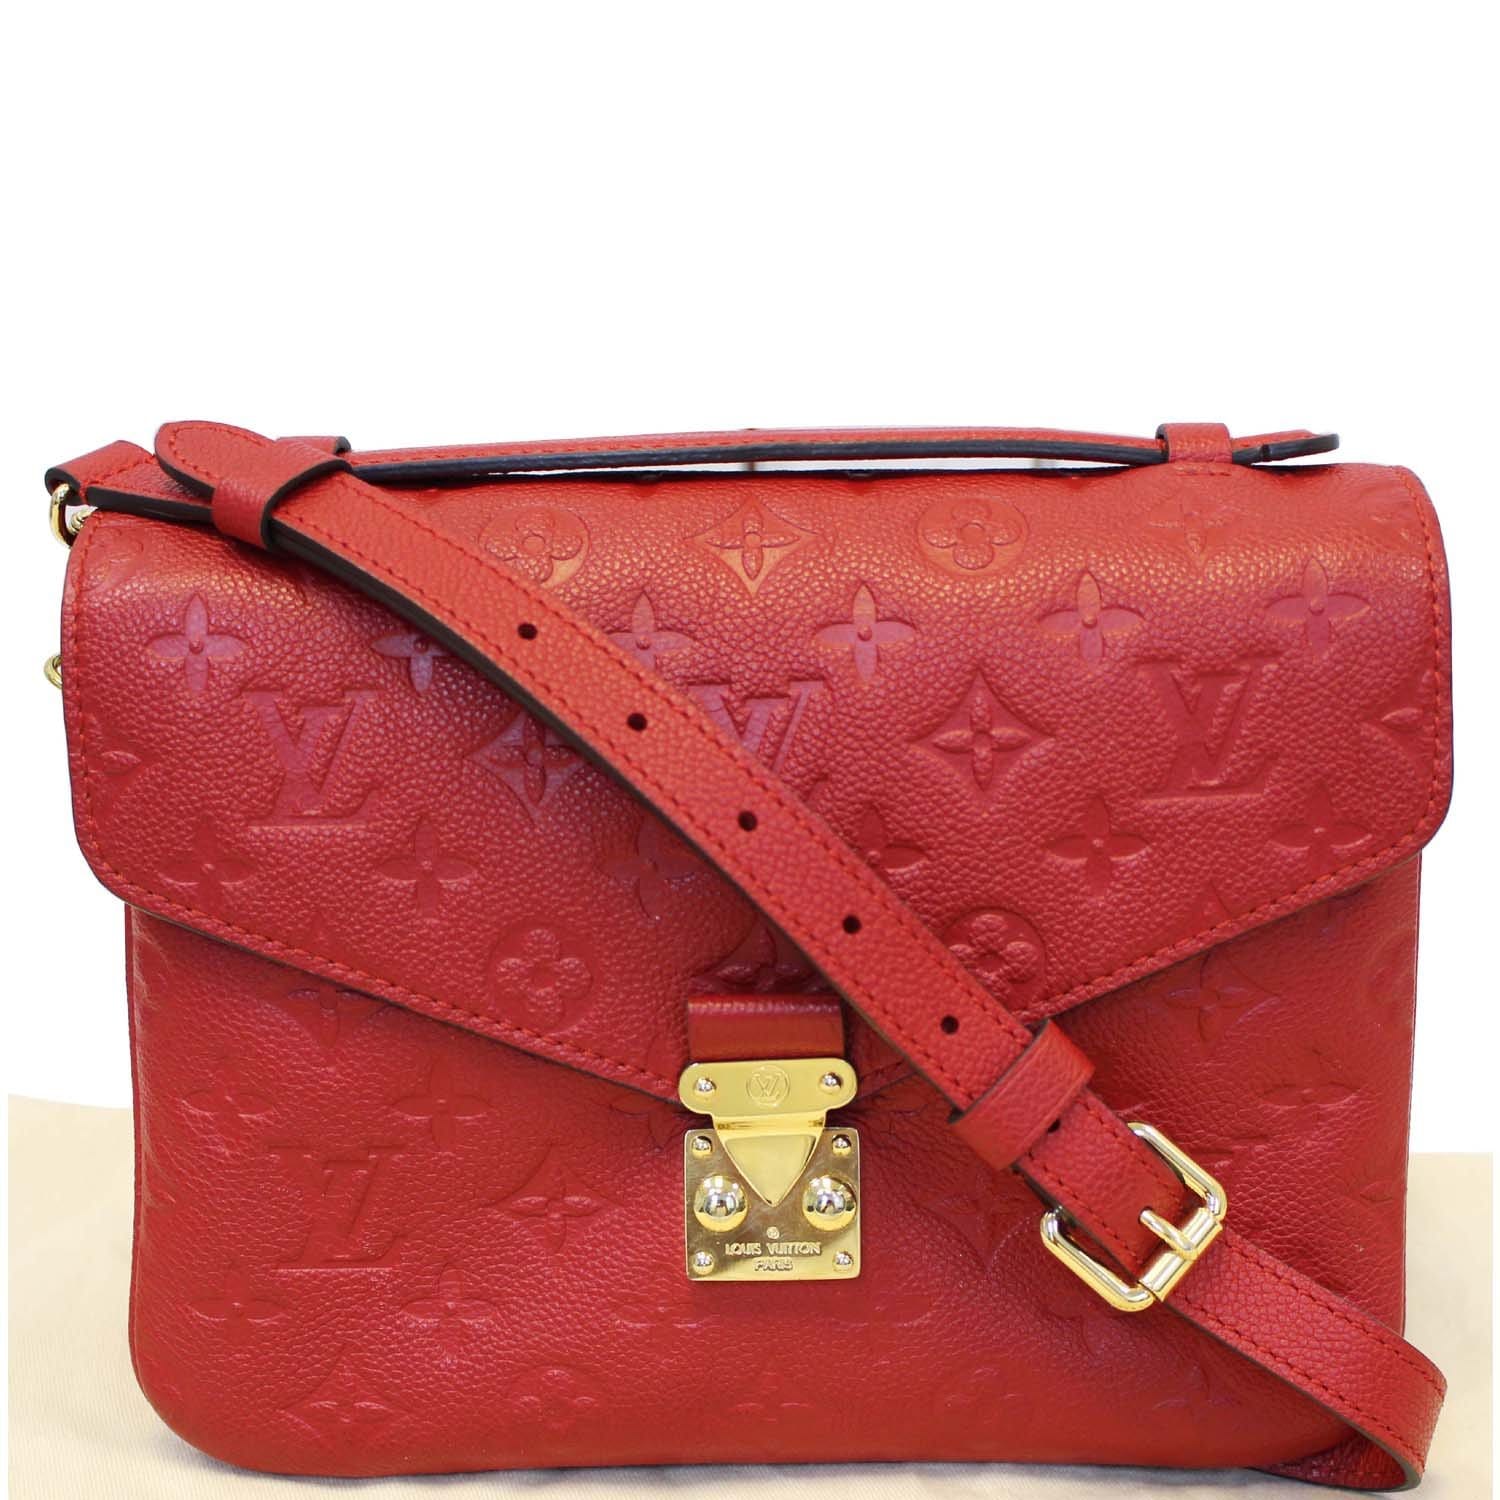 Louis Vuitton - Authenticated Metis Handbag - Leather Red Plain for Women, Very Good Condition